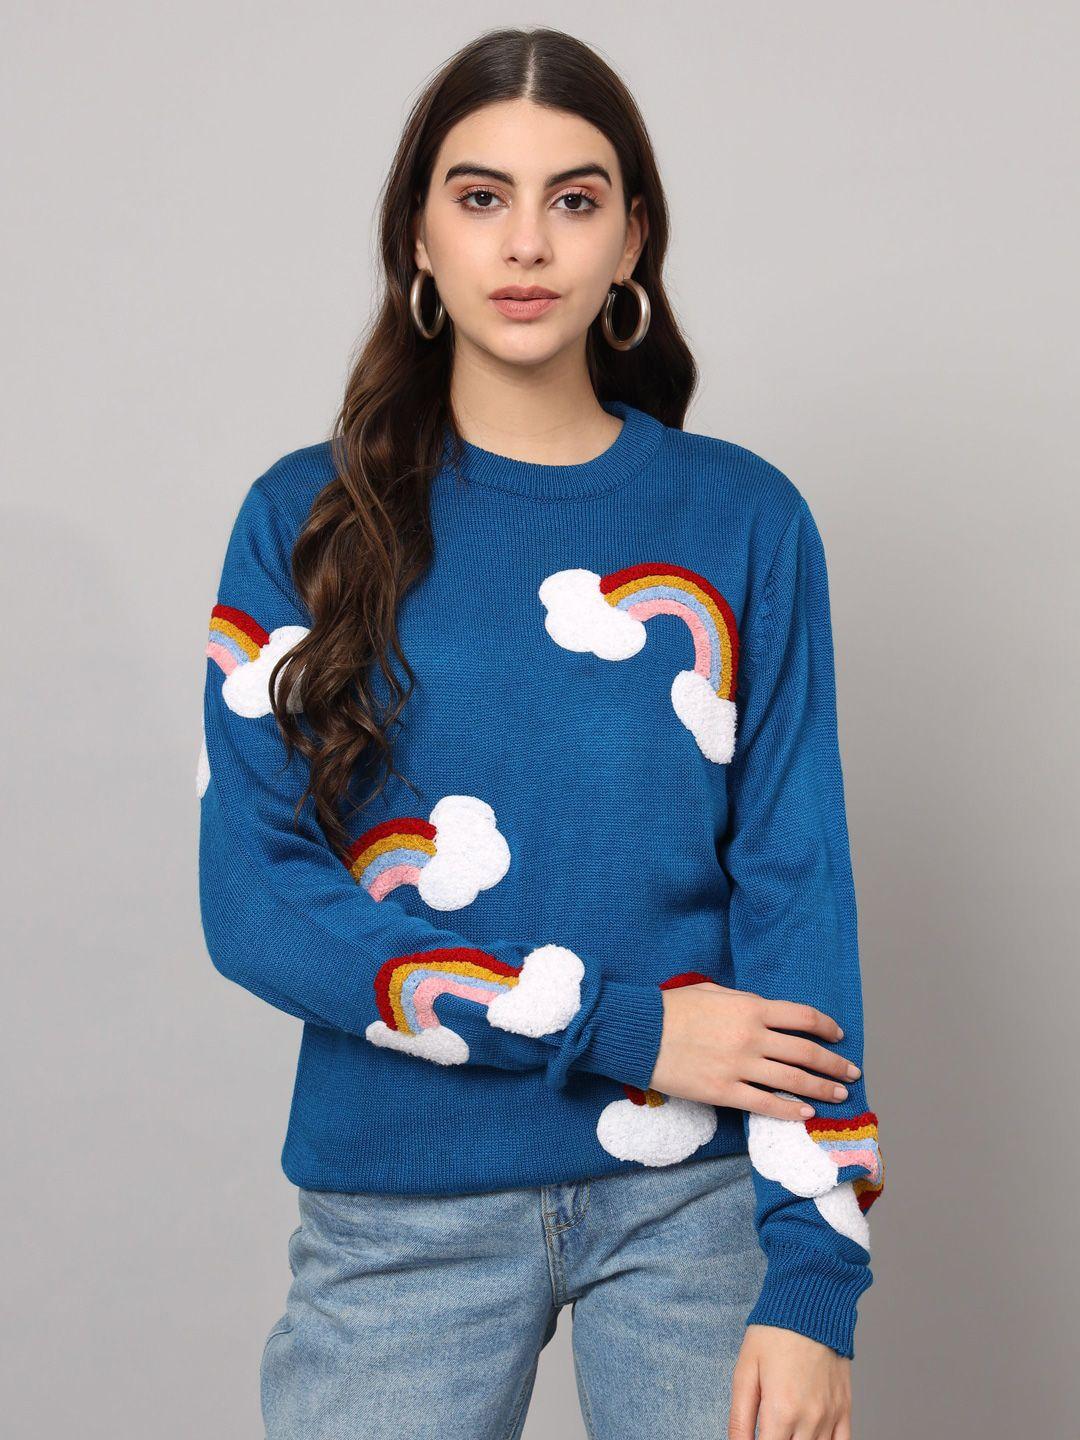 the-dry-state-blue-graphic-self-design-applique-acrylic-pullover-sweater